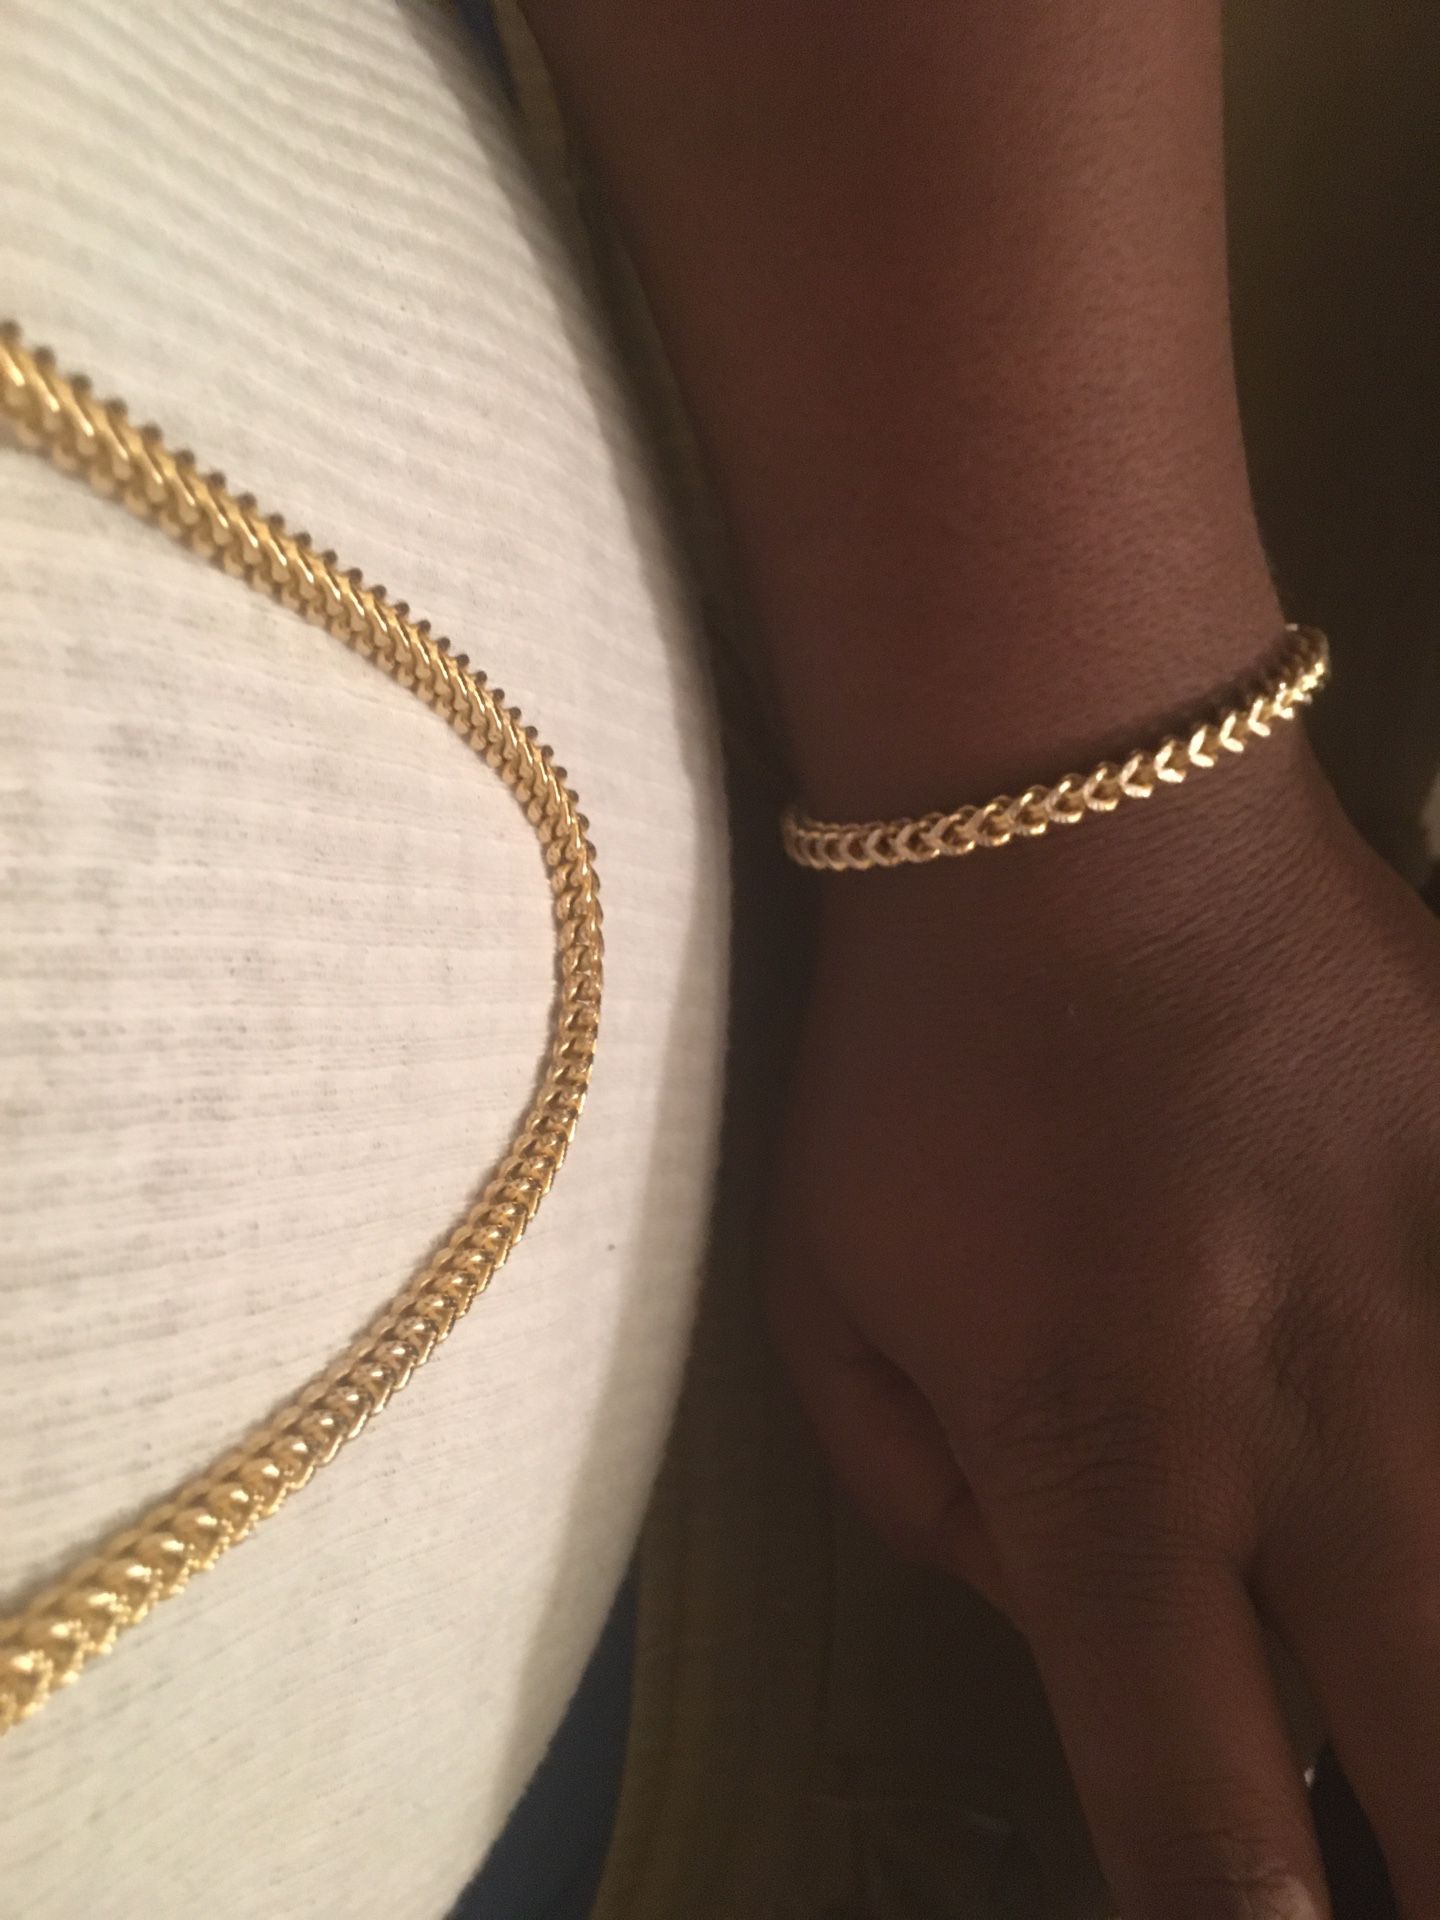 💯% real 10k gold Franco chain and bracelet